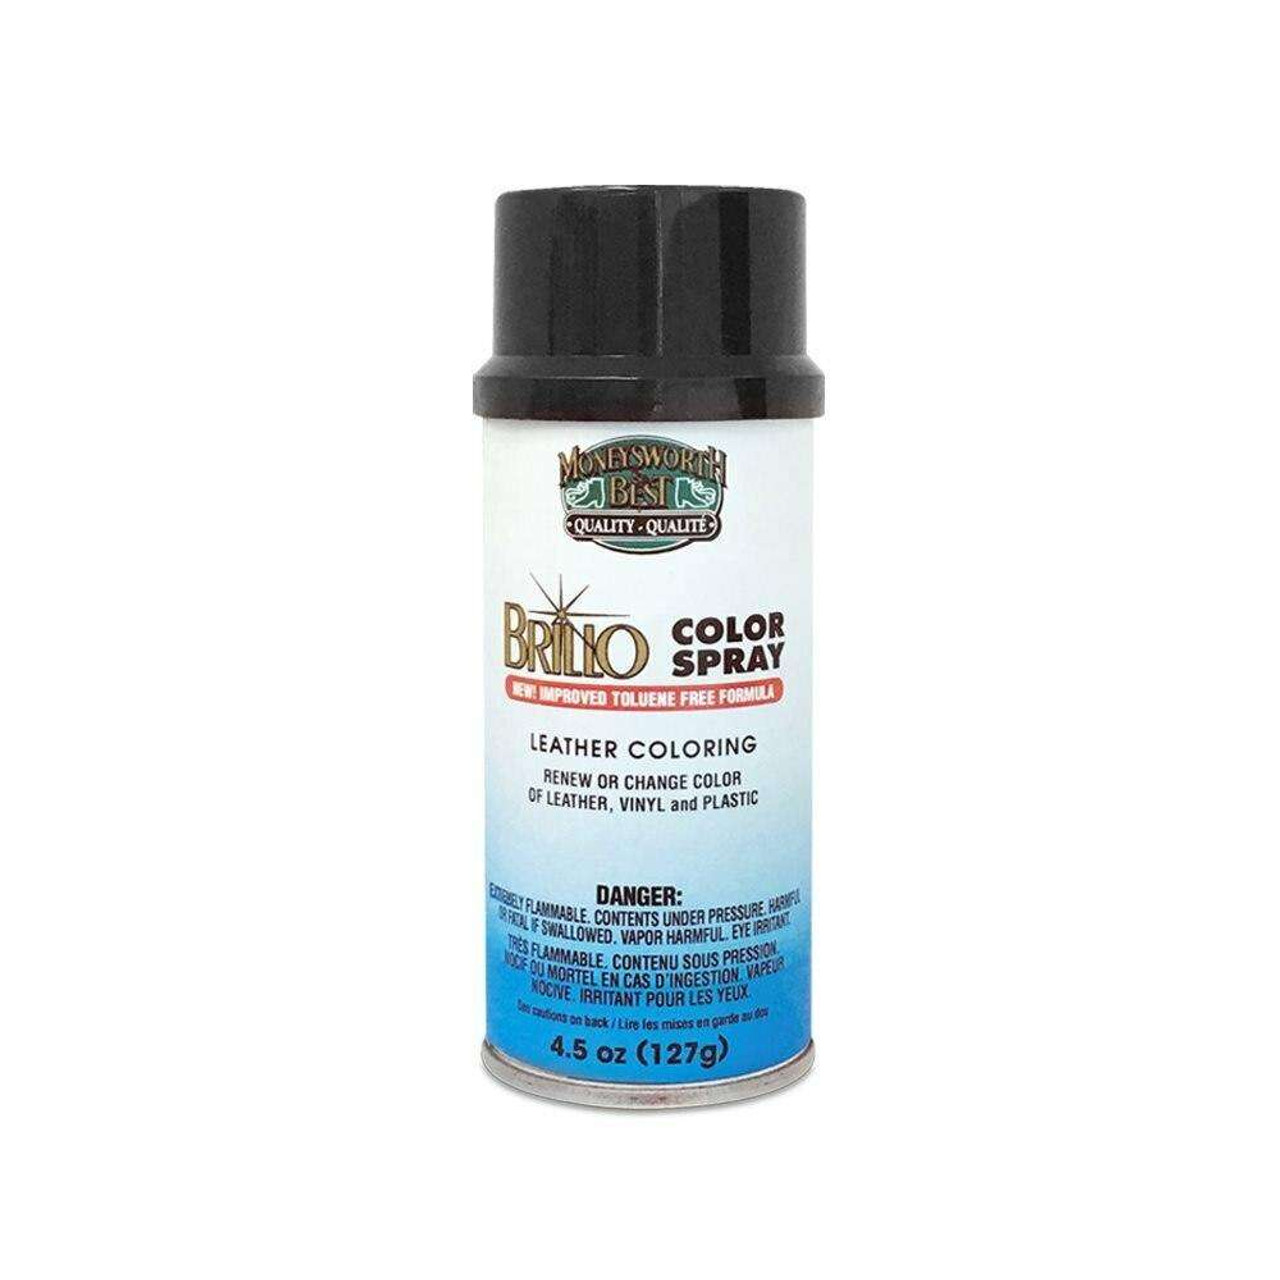 Orange Spray Paint - shoe dye spray for leather shoes and boots